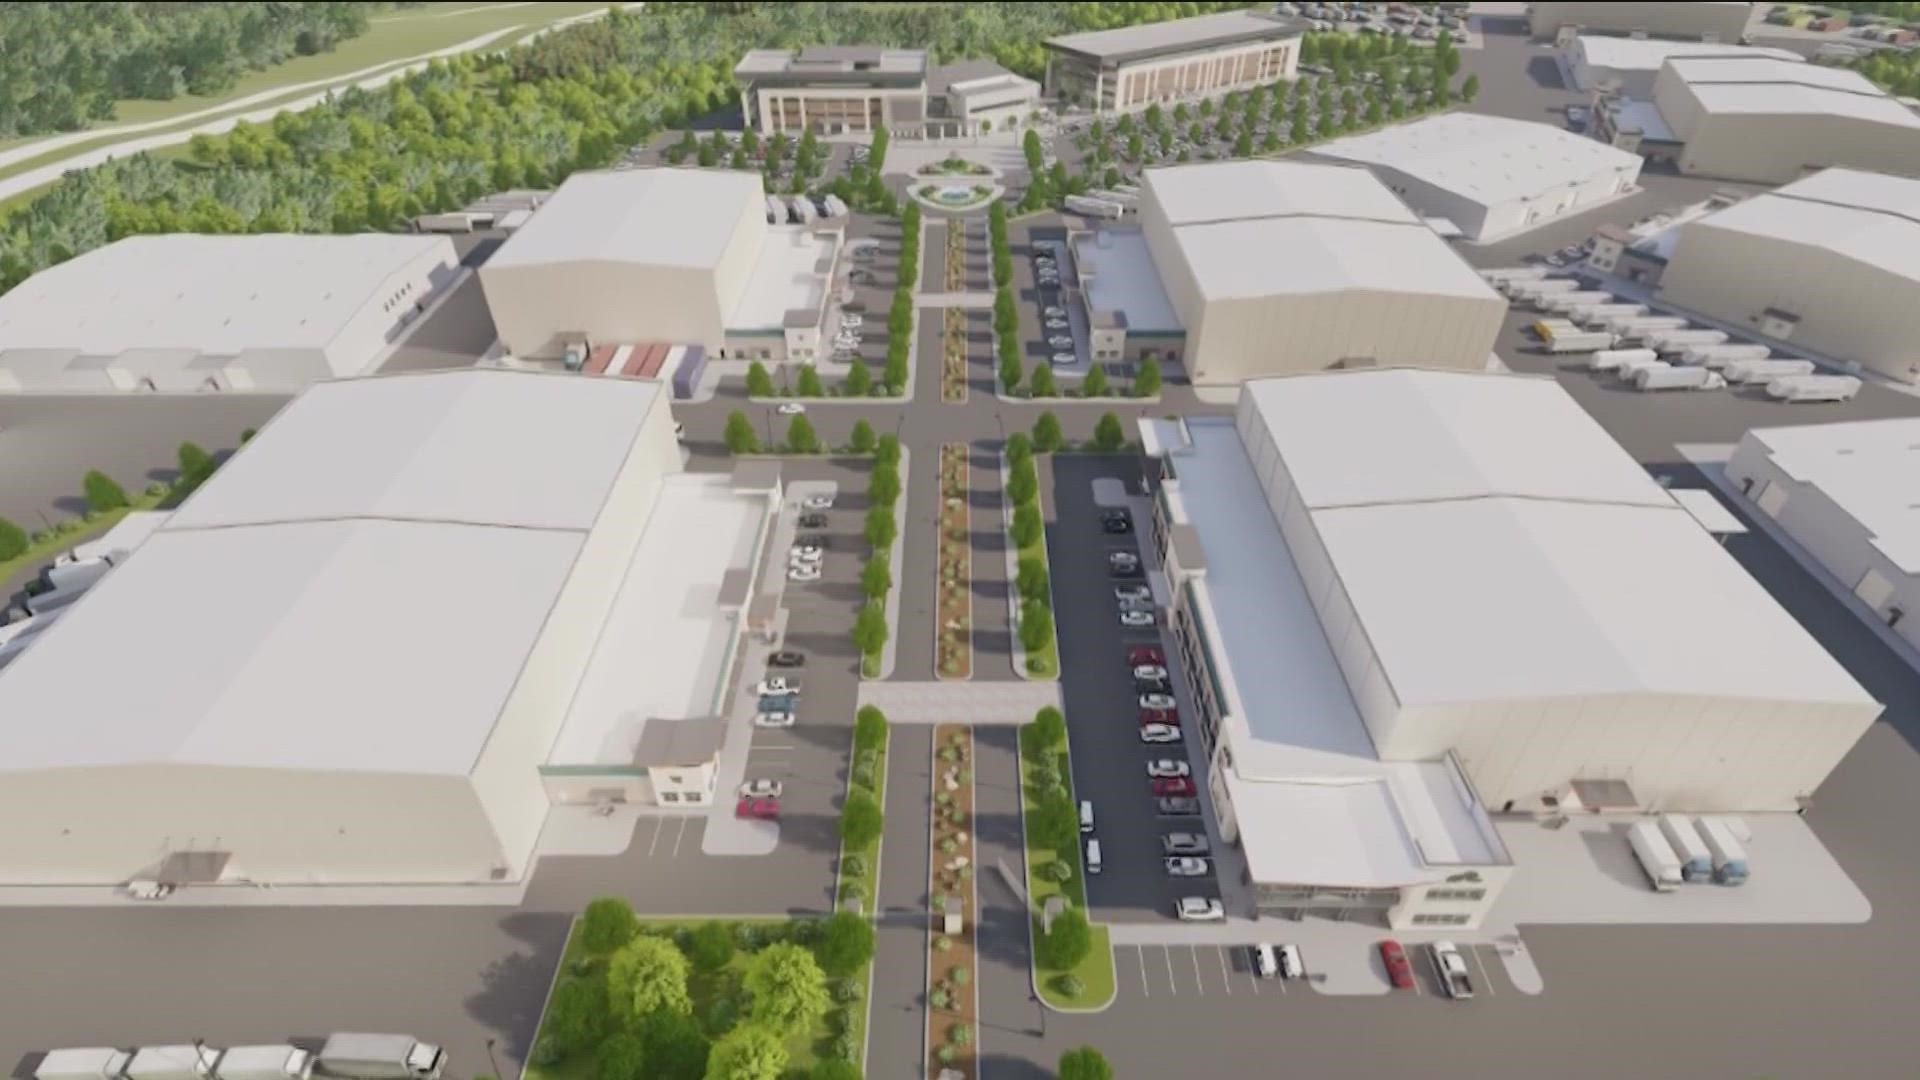 The San Marcos City Council is set to reconsider a development incentives agreement it recently approved for a planned film studio.